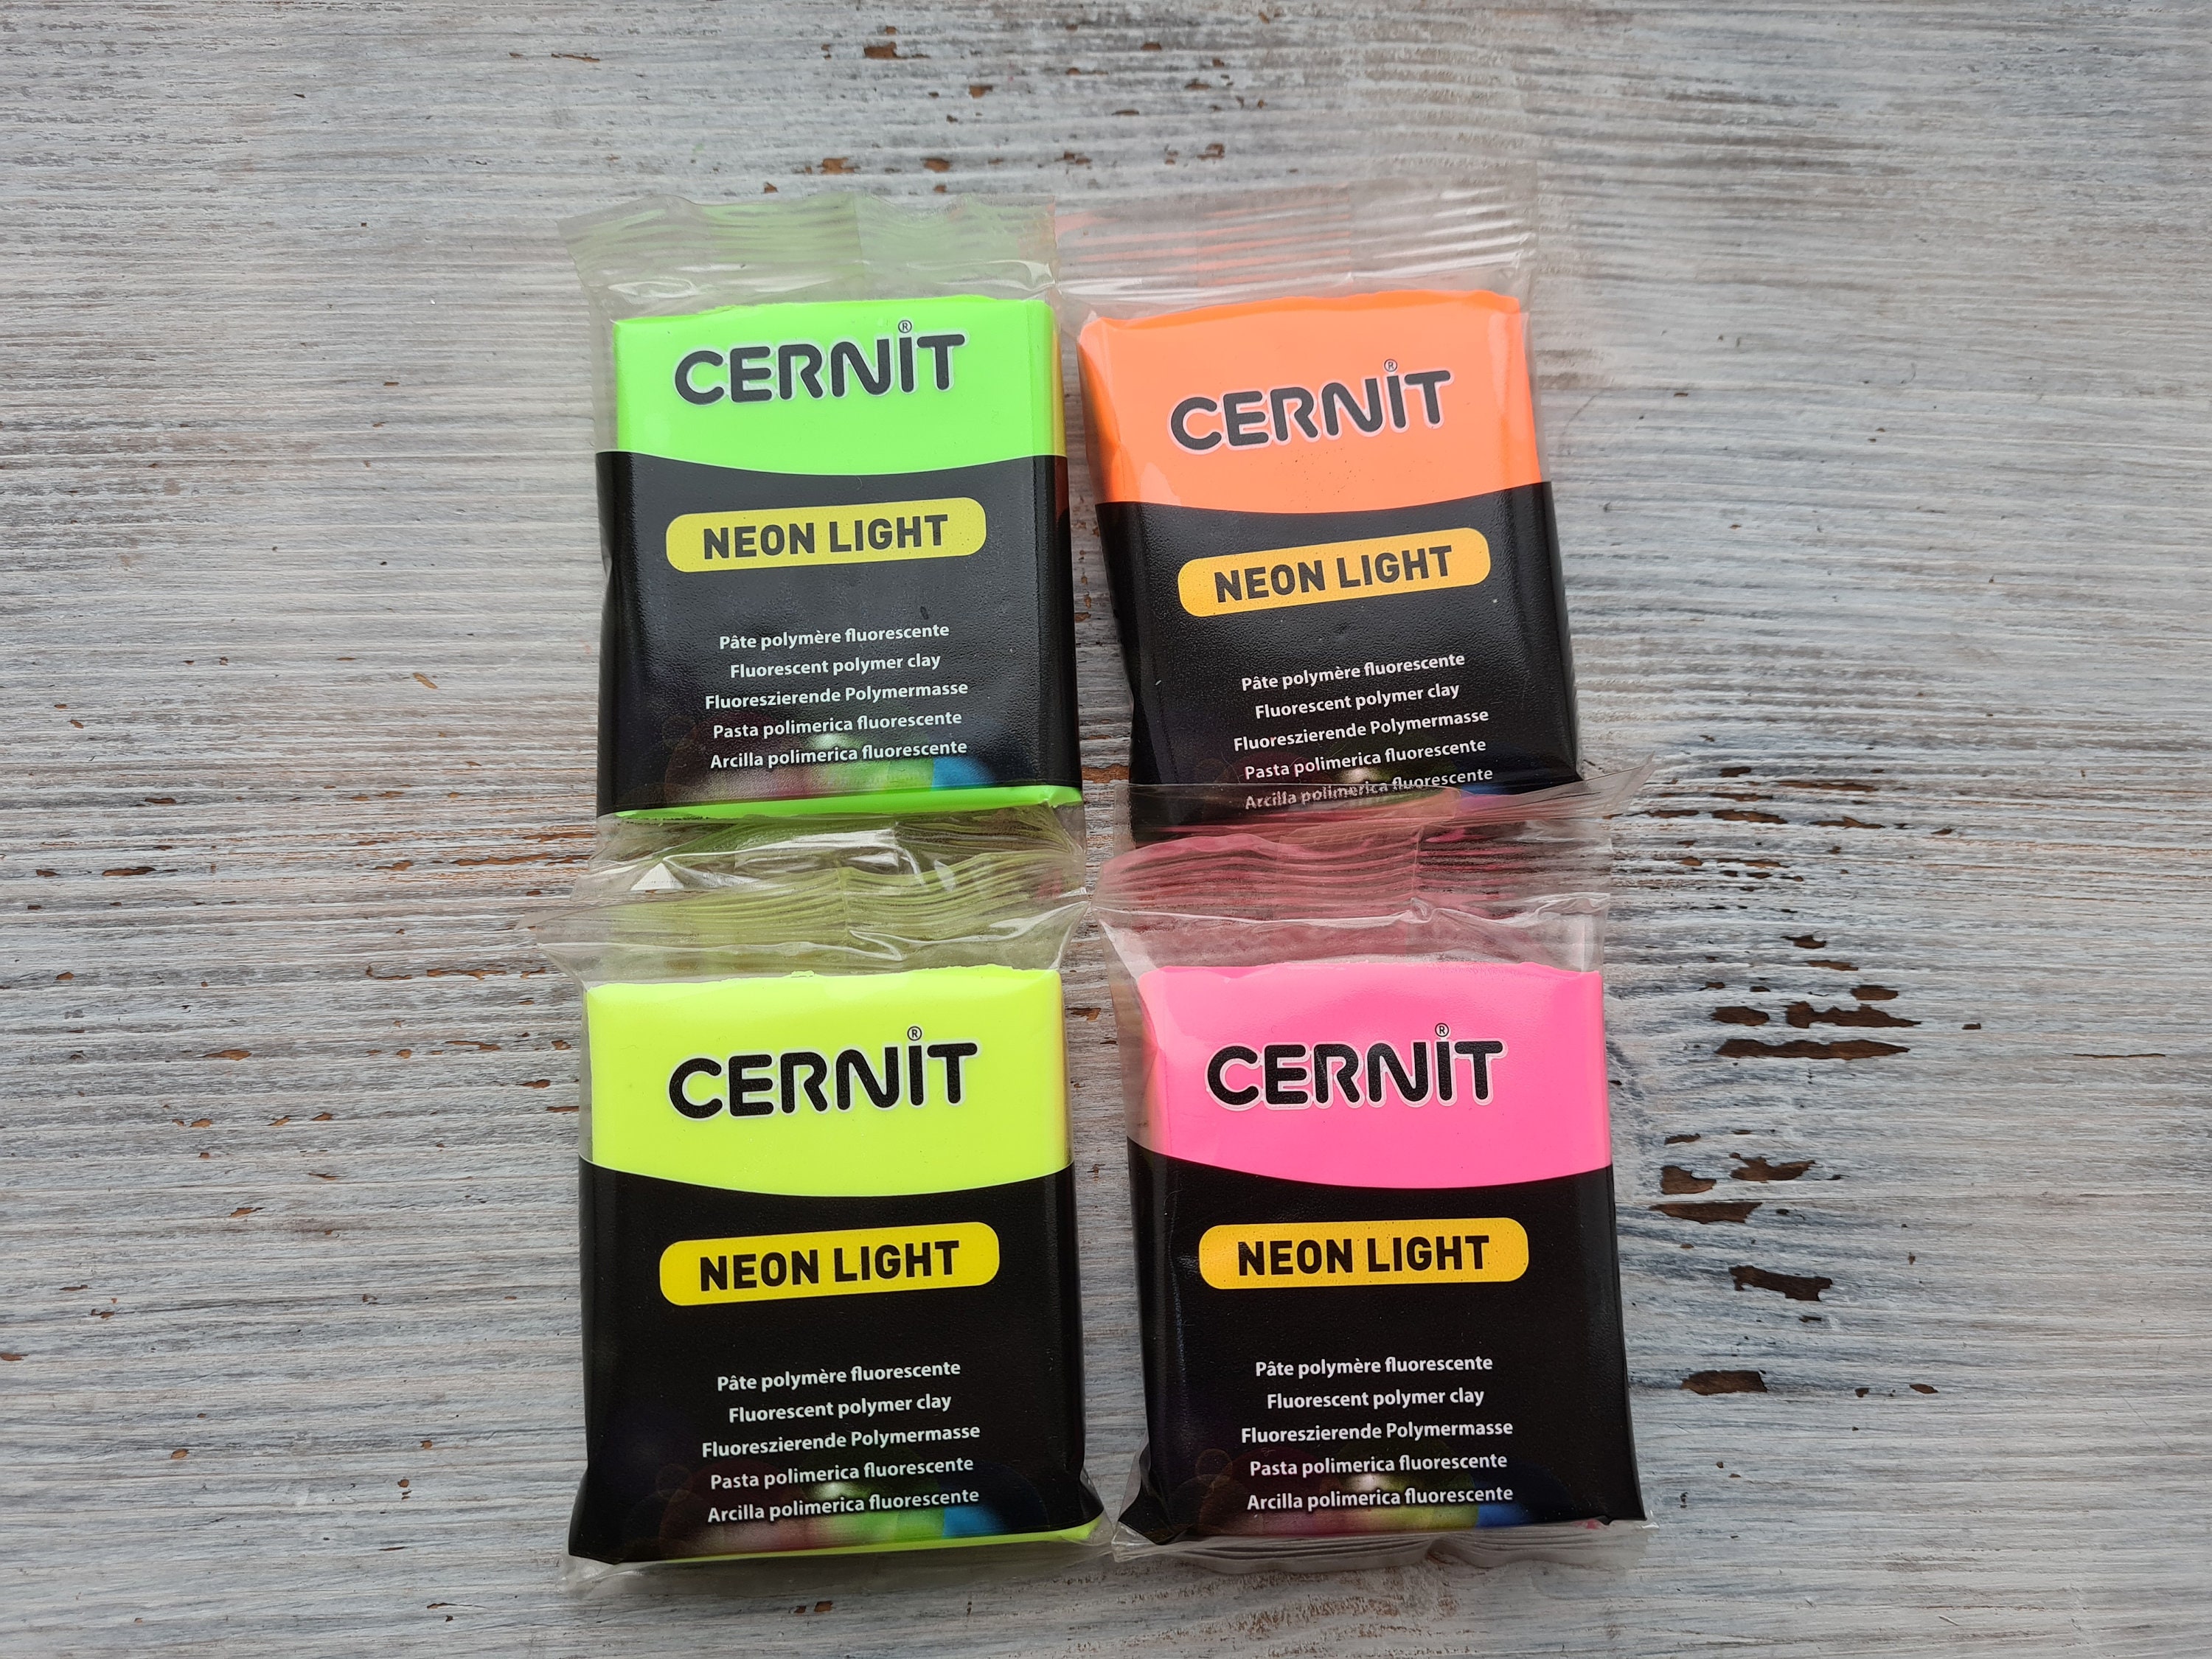 Cernit Polymer Clay - Translucent Series - 250 Grams - Translucent - Made  in Belgium Art Clay Price in India - Buy Cernit Polymer Clay - Translucent  Series - 250 Grams 